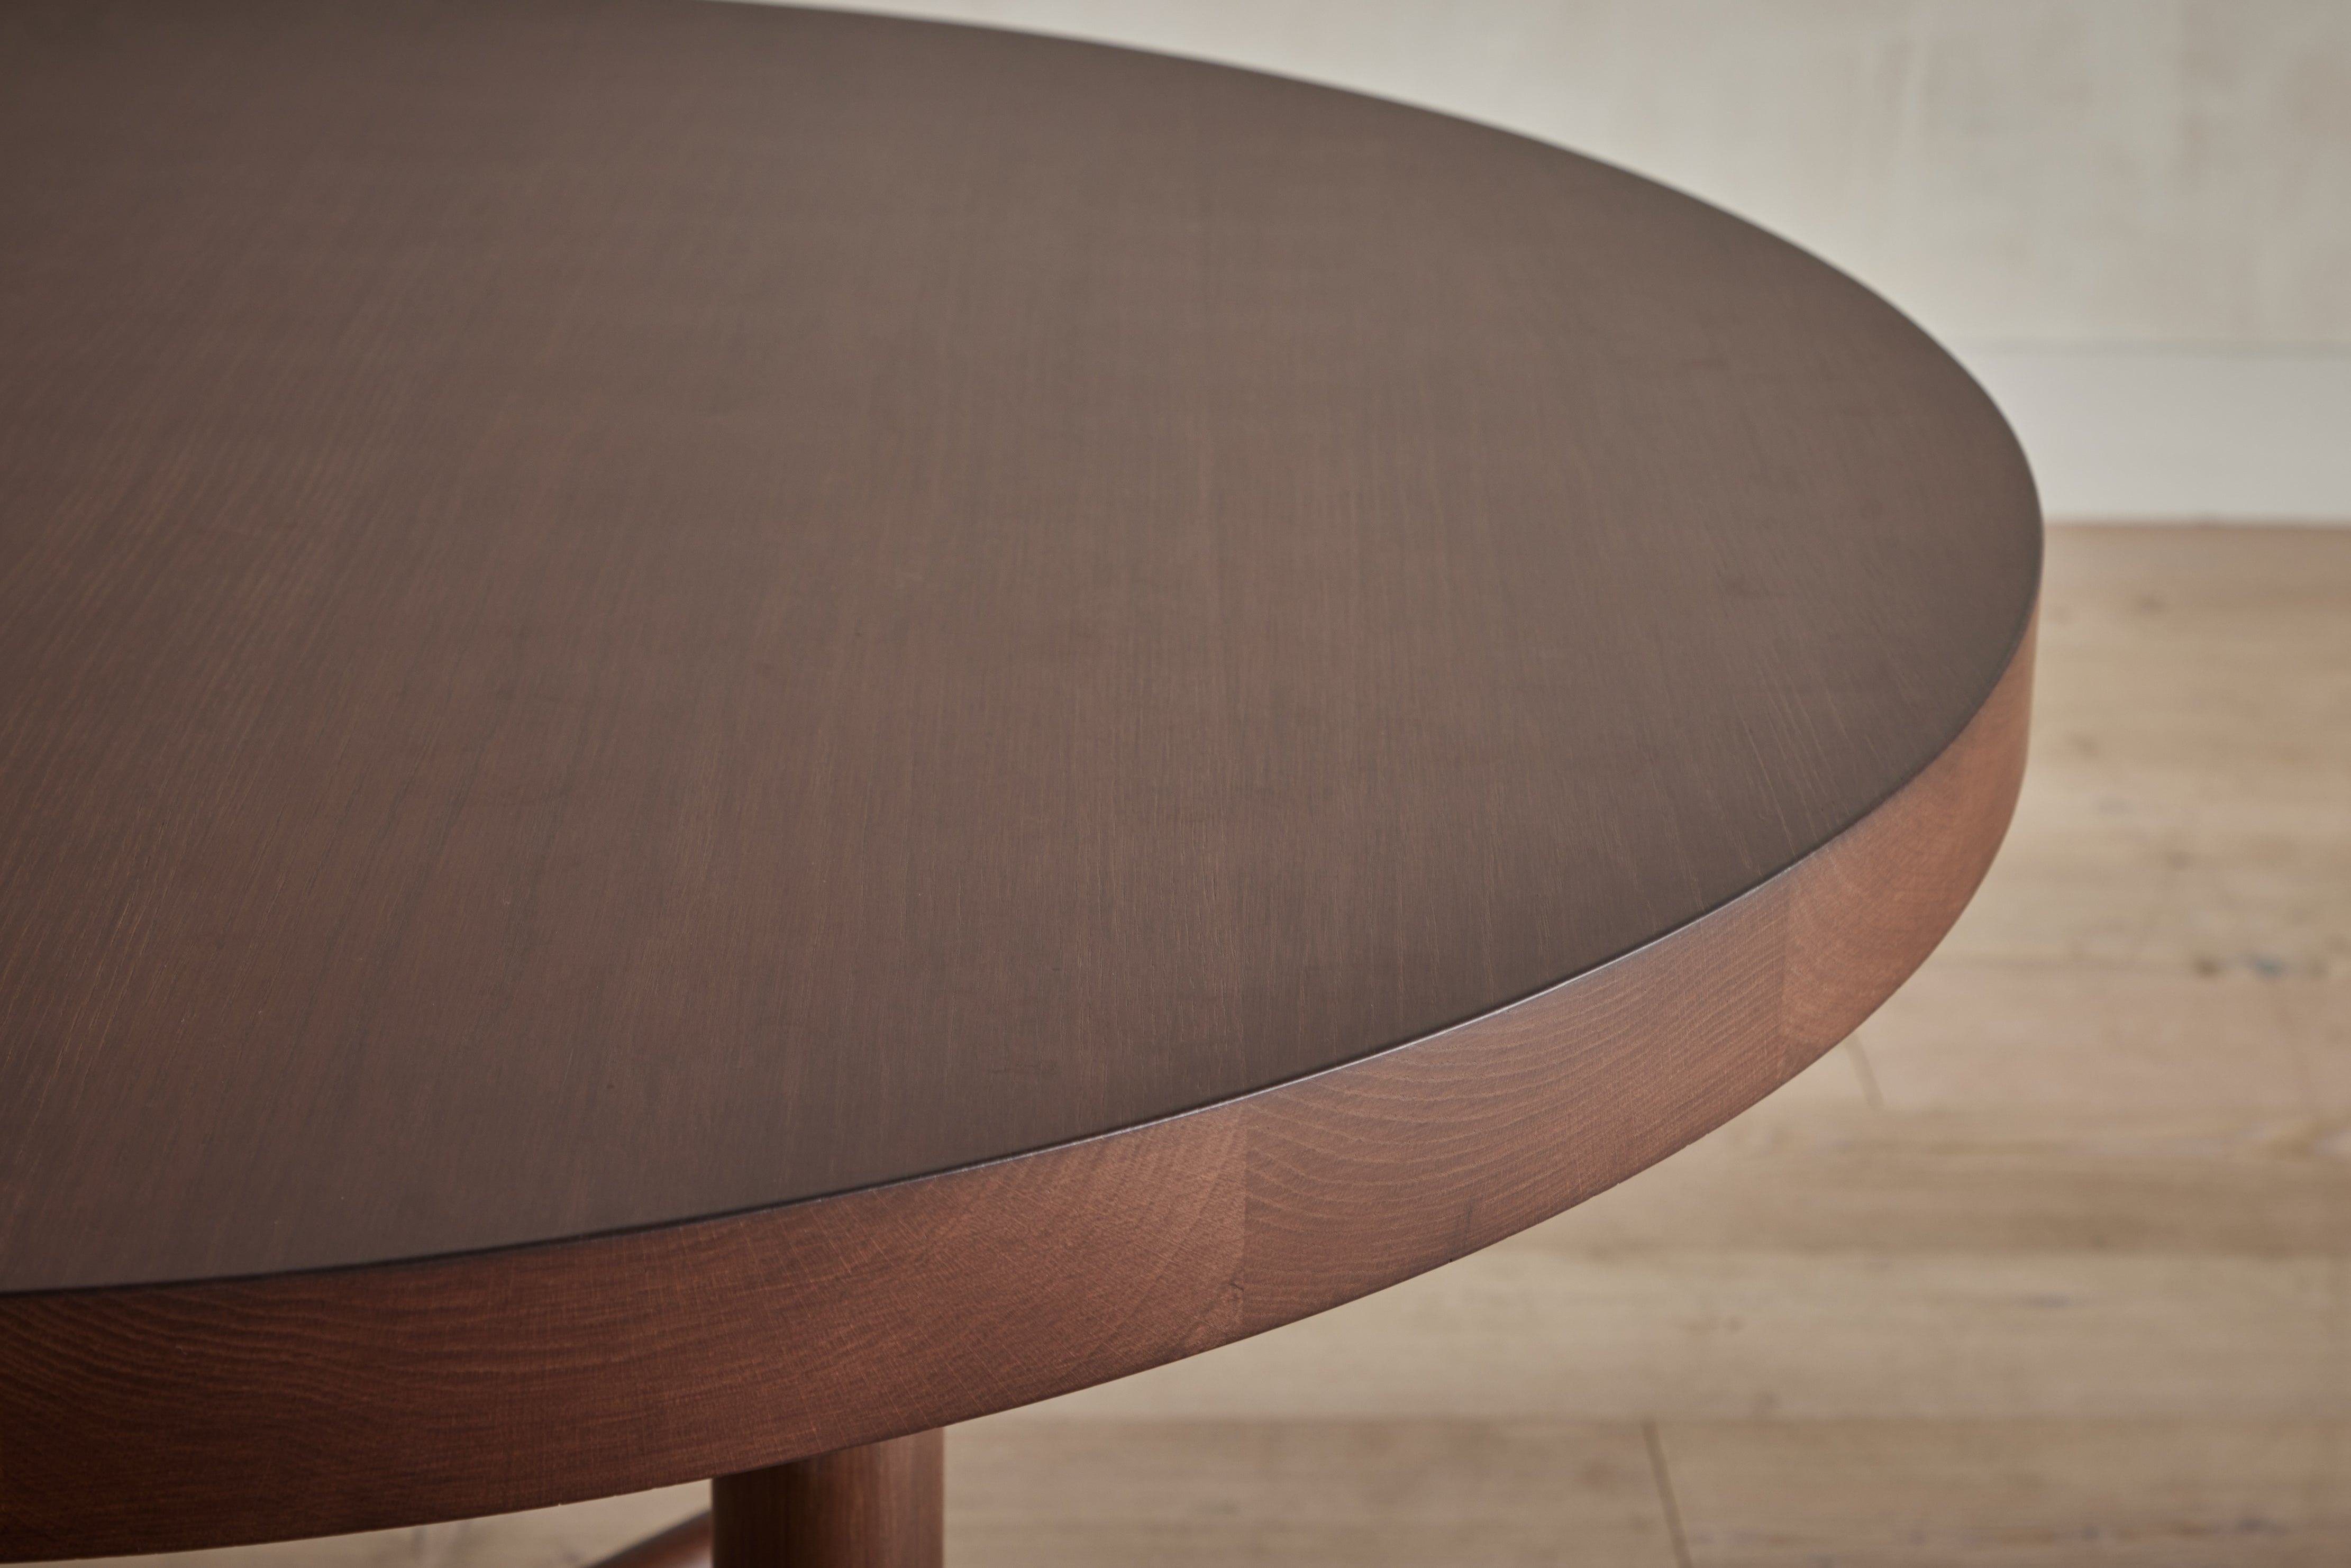 Nickey Kehoe 50" Round Dining Table - In Stock